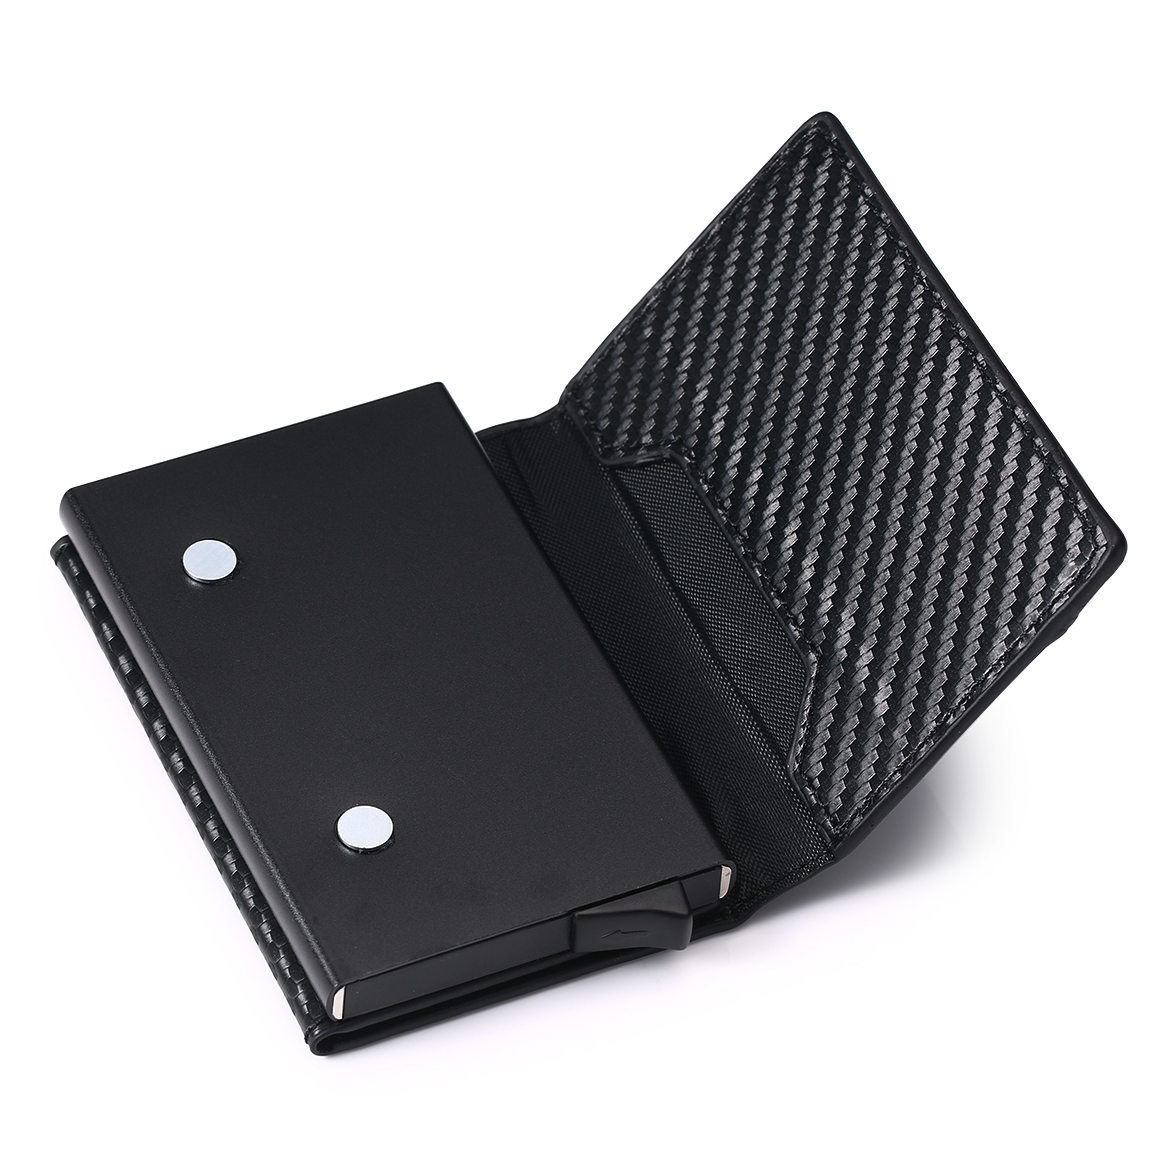 WALLET Aluminum Wallet With PU Leather And Zipper - Carbon